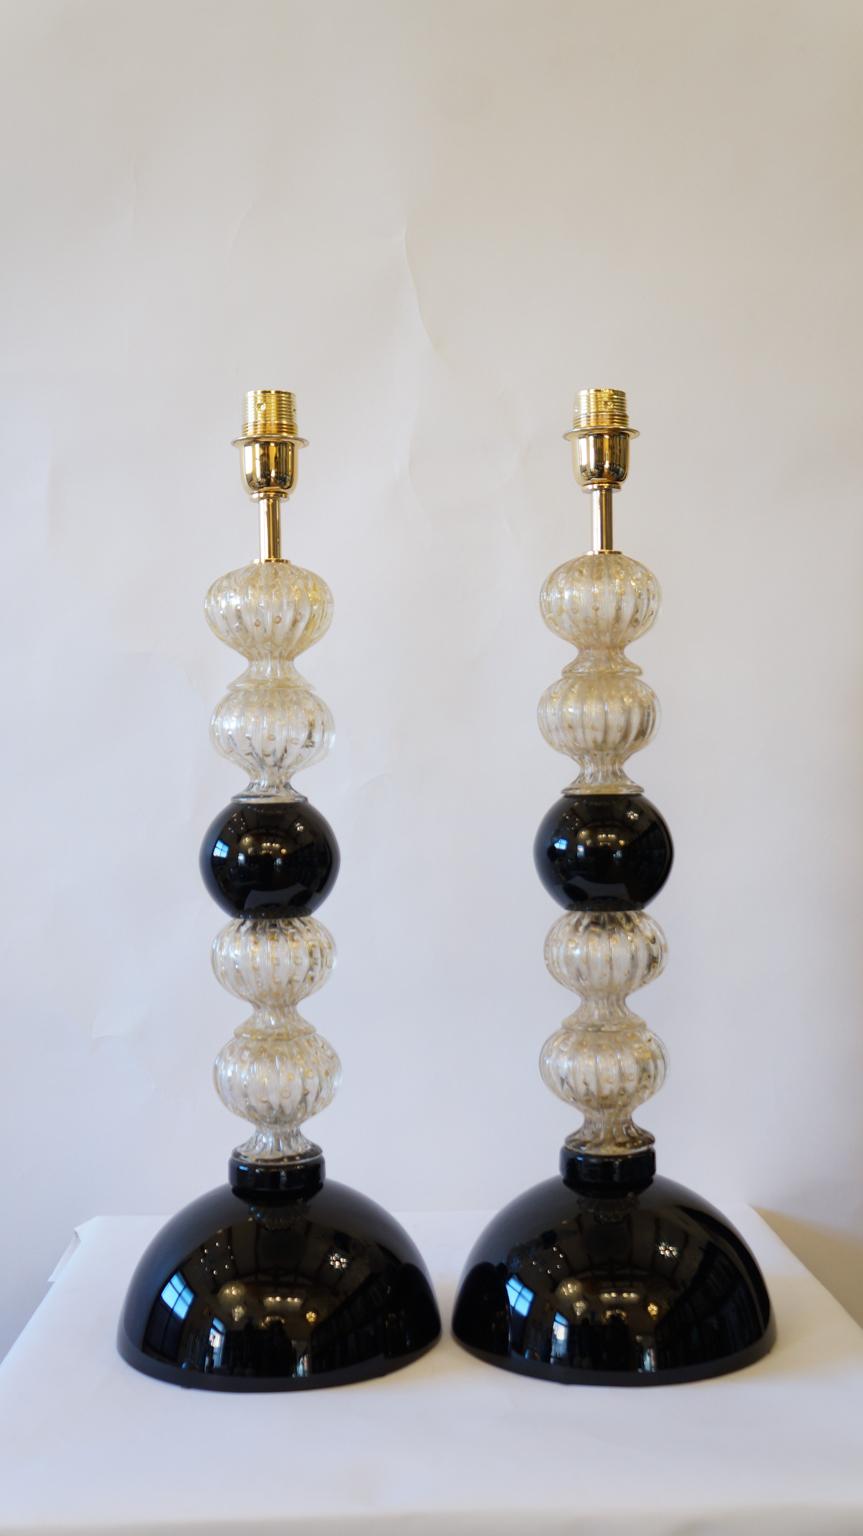 These are elegant Murano glass lamps, the ones you see pictured. 
They were designed for the first time in 1982 by Toso Murano and are magnificent. 
They are composed of four spherical elements that follow each other divided by ball black. The